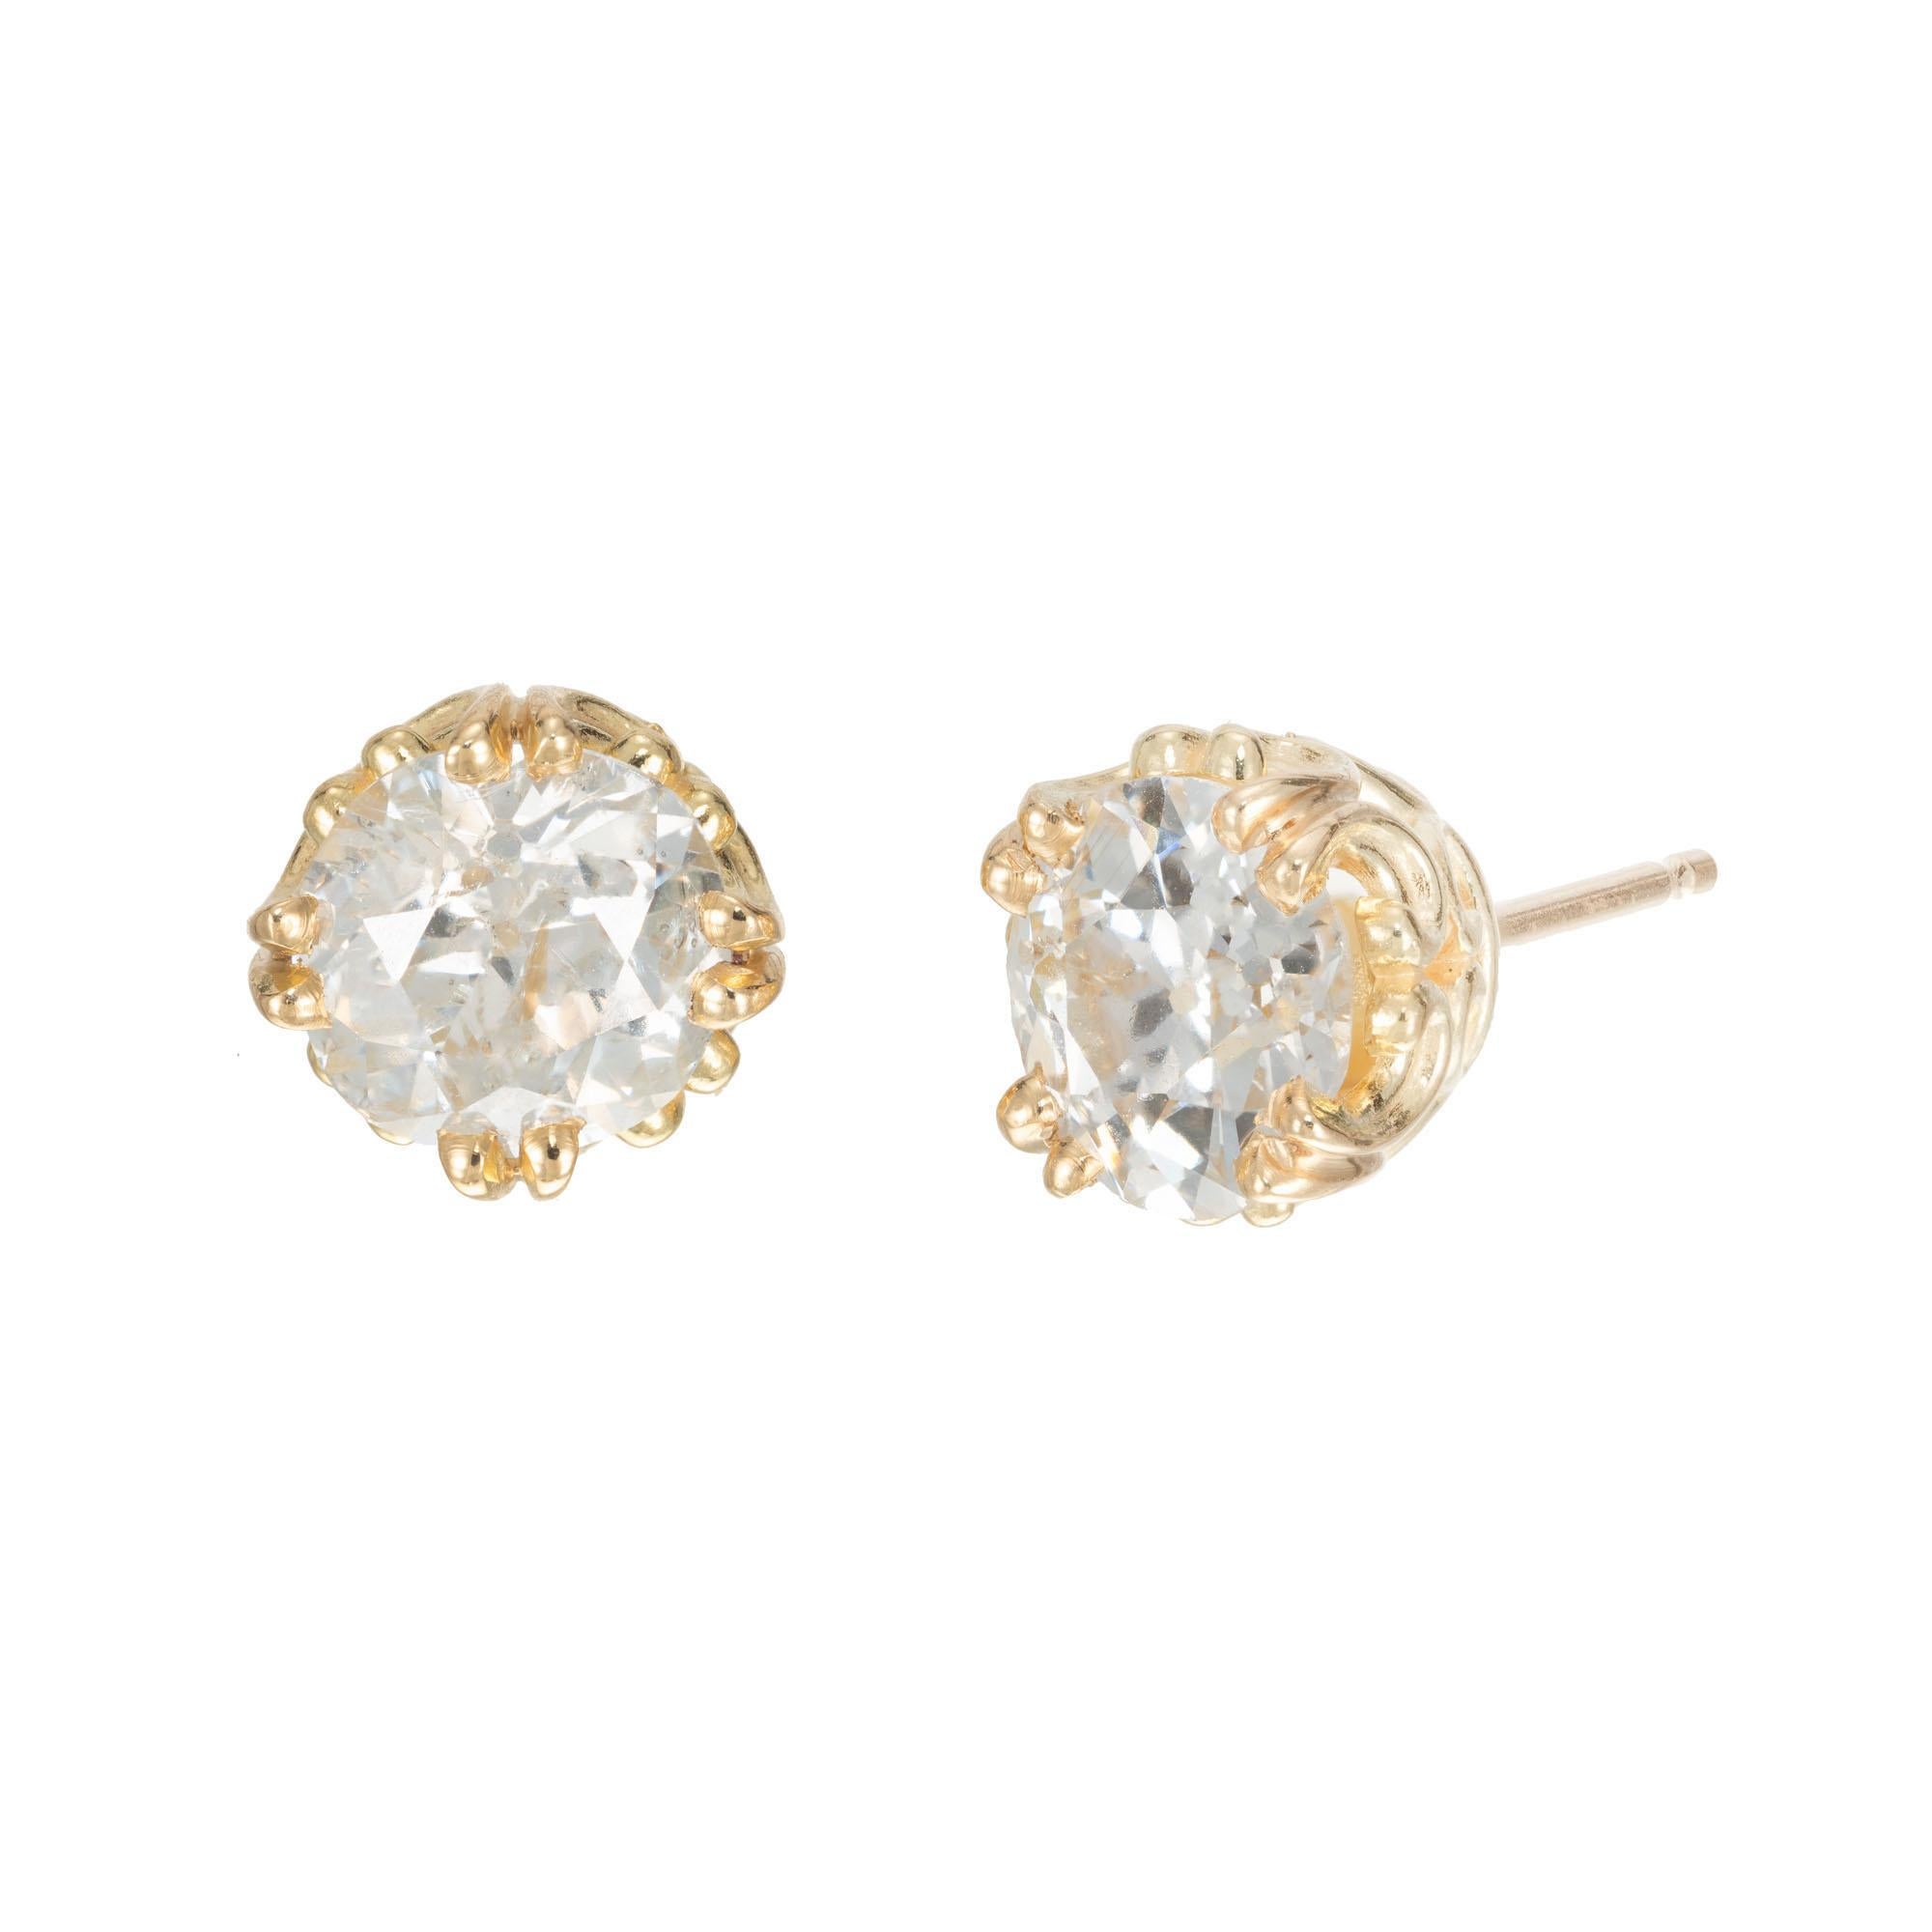 Old European Cut Peter Suchy 2.41 Carat Diamond Yellow Gold Stud Earrings For Sale